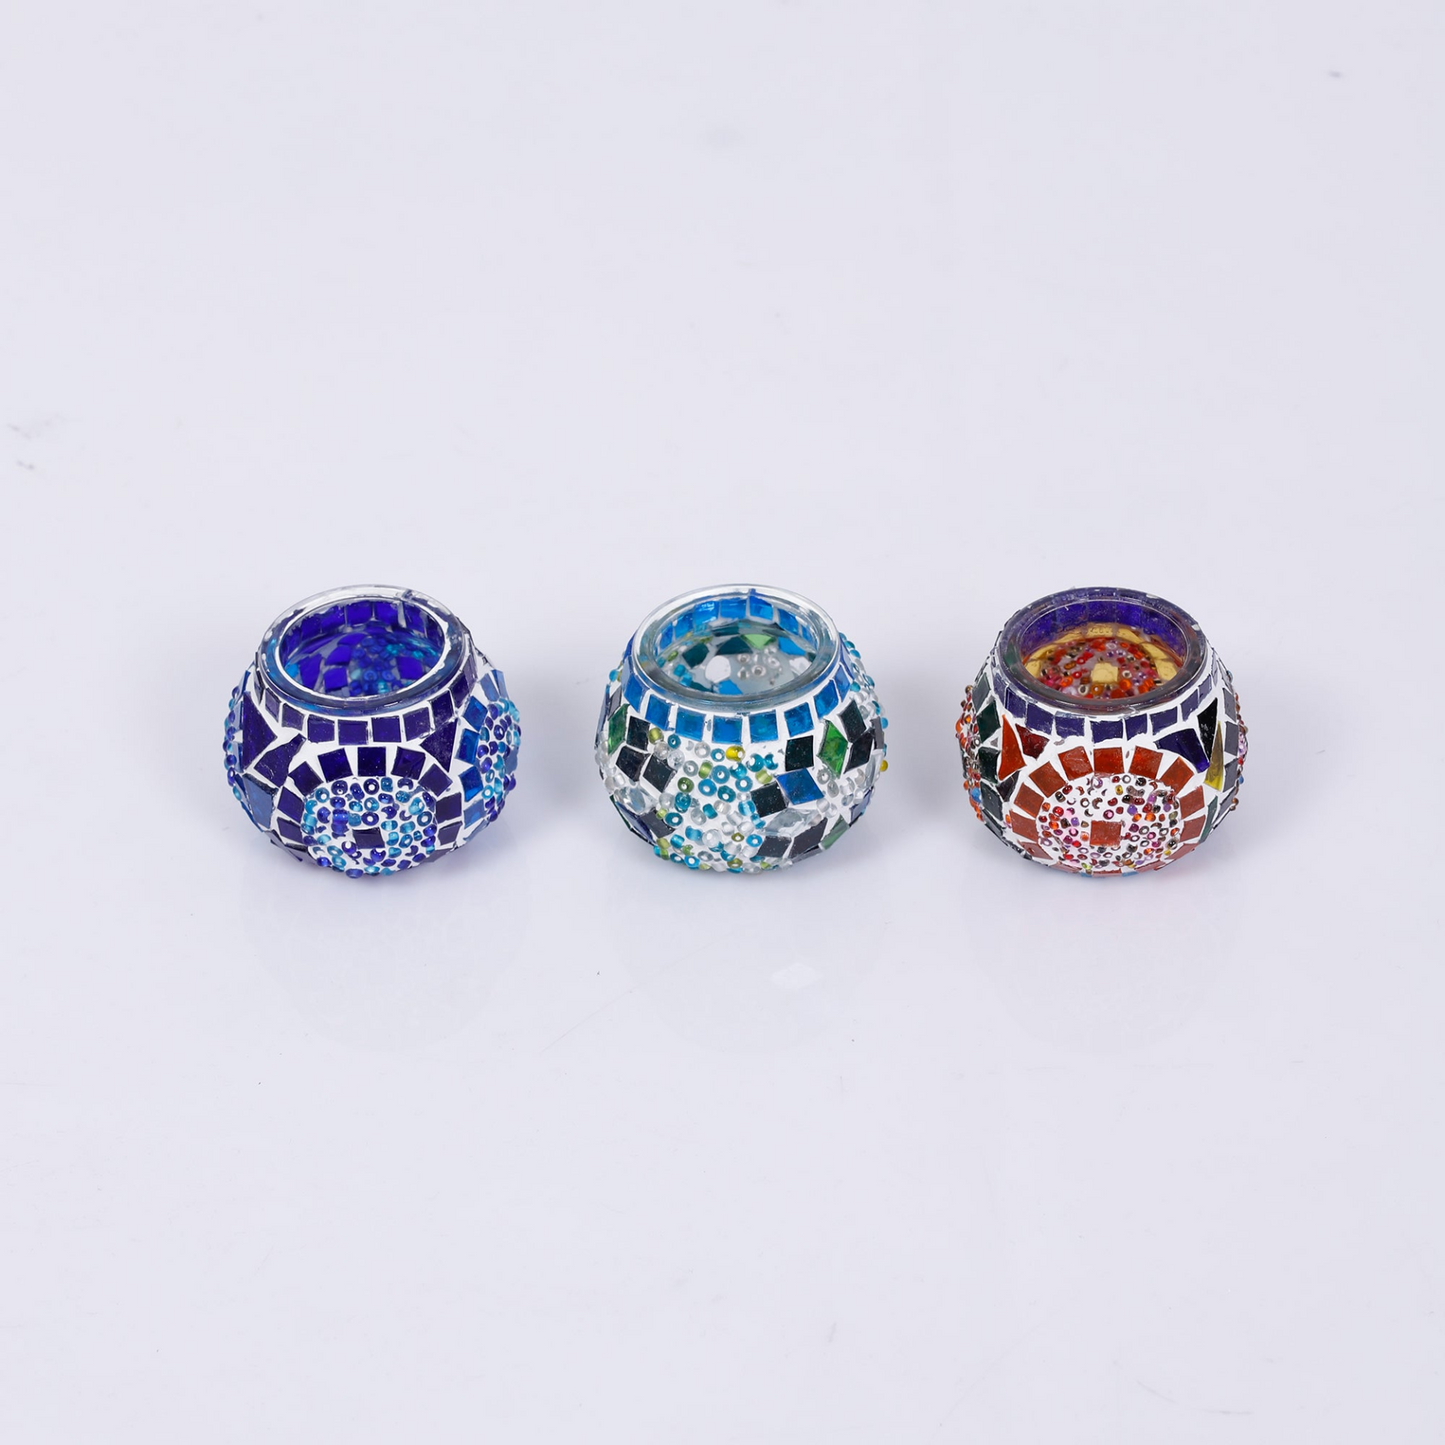 Blue Turquoise Multicolor Mosaic Candleholder Set of 3 - Handmade Moroccan Mid Century Candle Holder